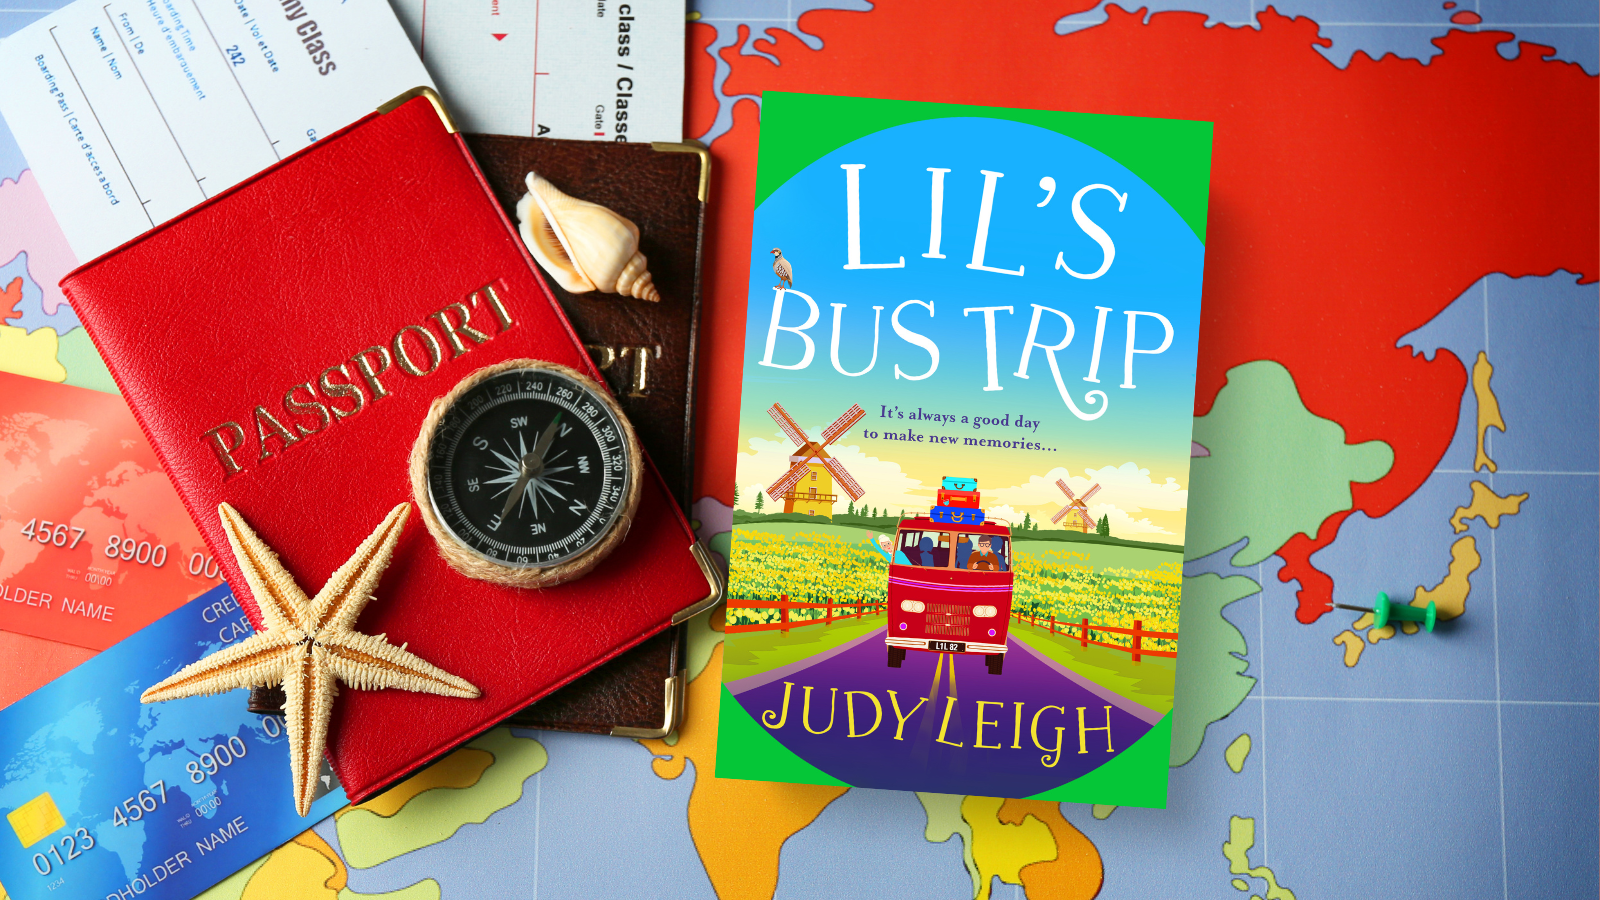 Blog Tour: Lil’s Bus Trip by Judy Leigh